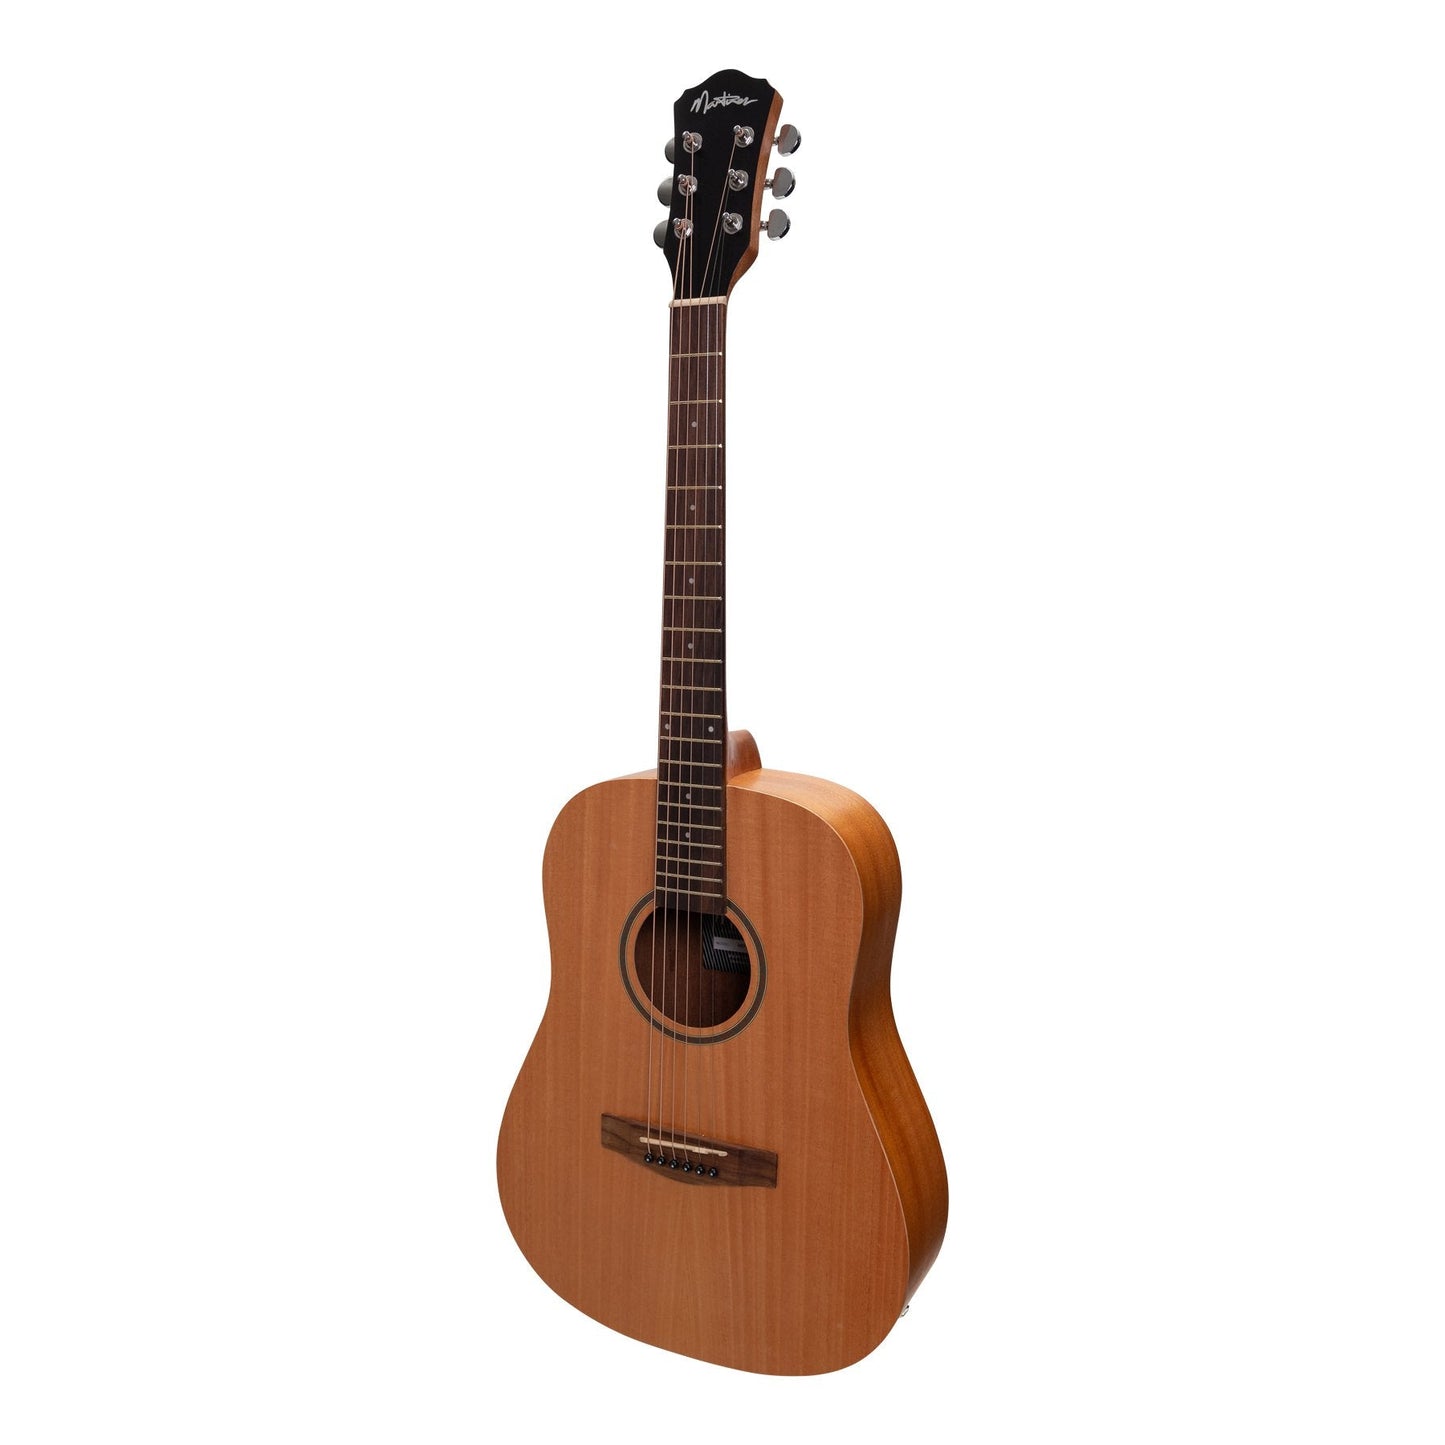 Martinez Acoustic-Electric Middy Traveller Guitar with Built-In Tuner (Mahogany)